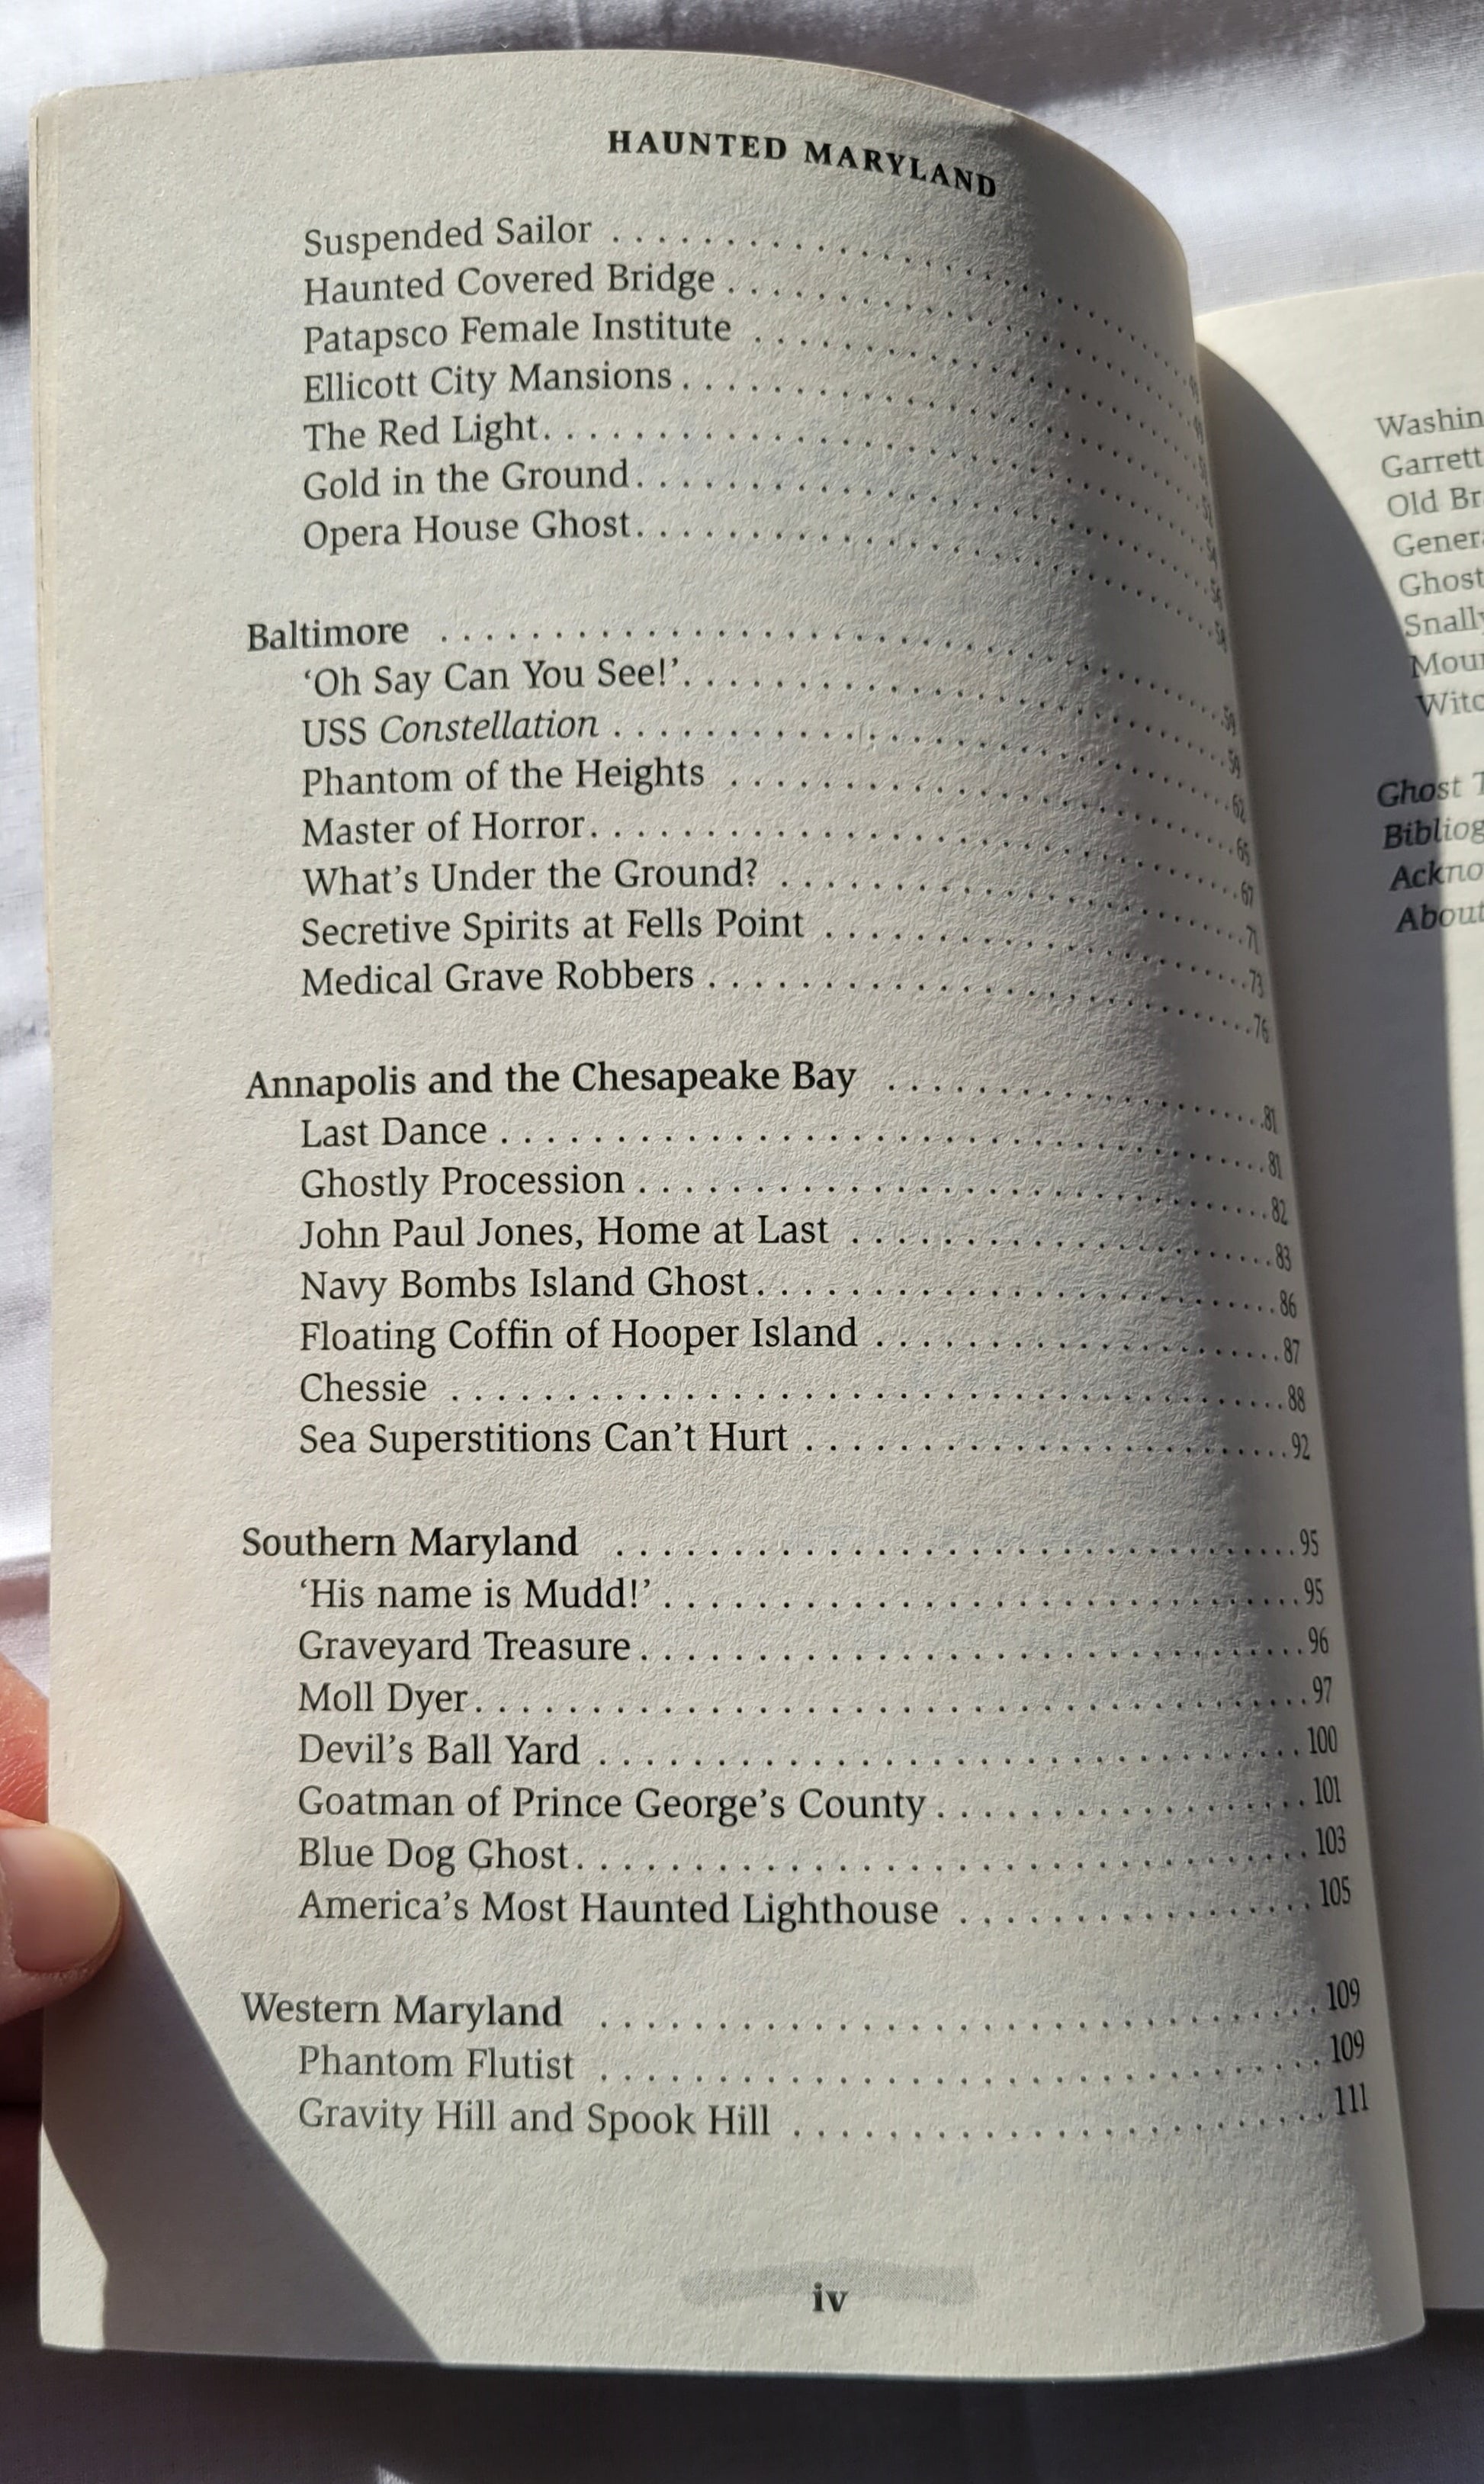 Used book for sale, "Haunted Maryland: Ghosts and Strange Phenomena of the Old Line State" by Ed Okonowicz, published by Stackpole Books. View of table of contents.